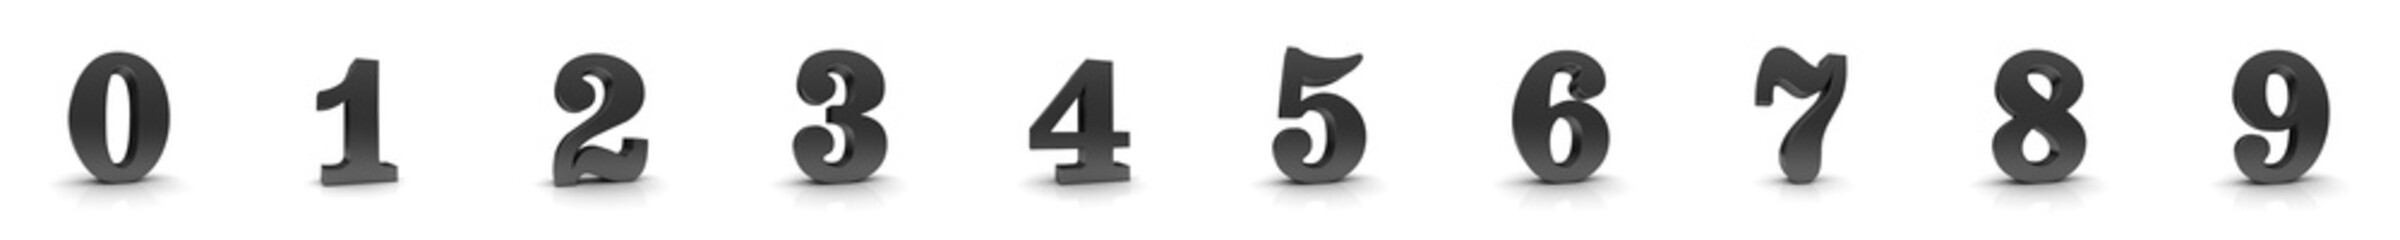 black numbers 3d numeral sign digit symbols countdown figures 0 1 2 3 4 5 6 7 8 9 zero one two three four five six seven eight nine